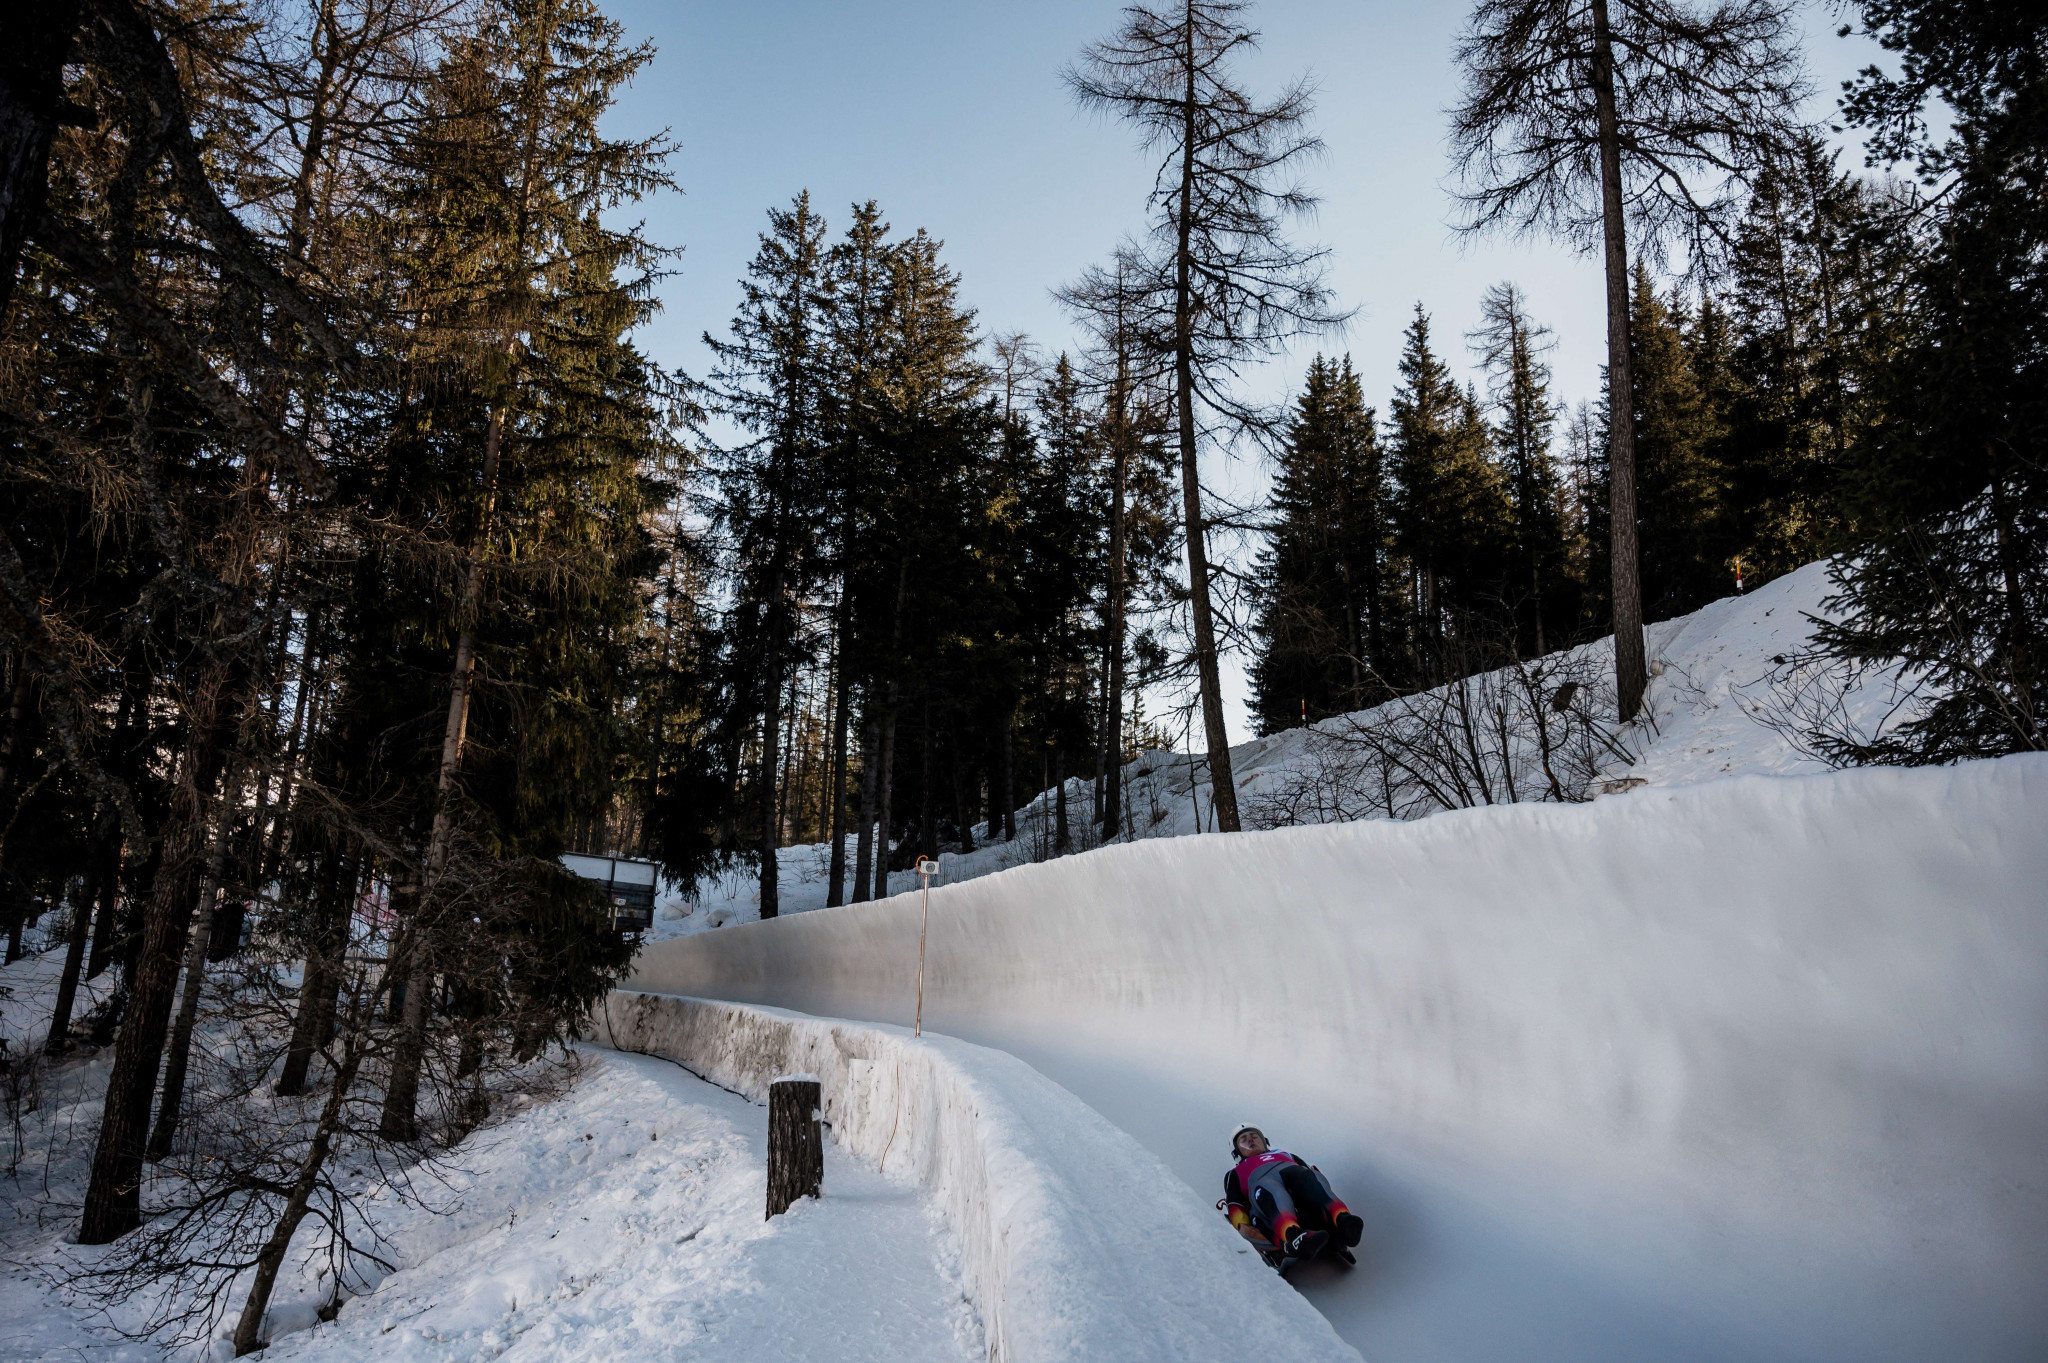 Plans to apply for the inclusion of natural track luge at Milan Cortina 2026 have been shelved, although the FIL will apply for women's doubles to be added ©Getty Images